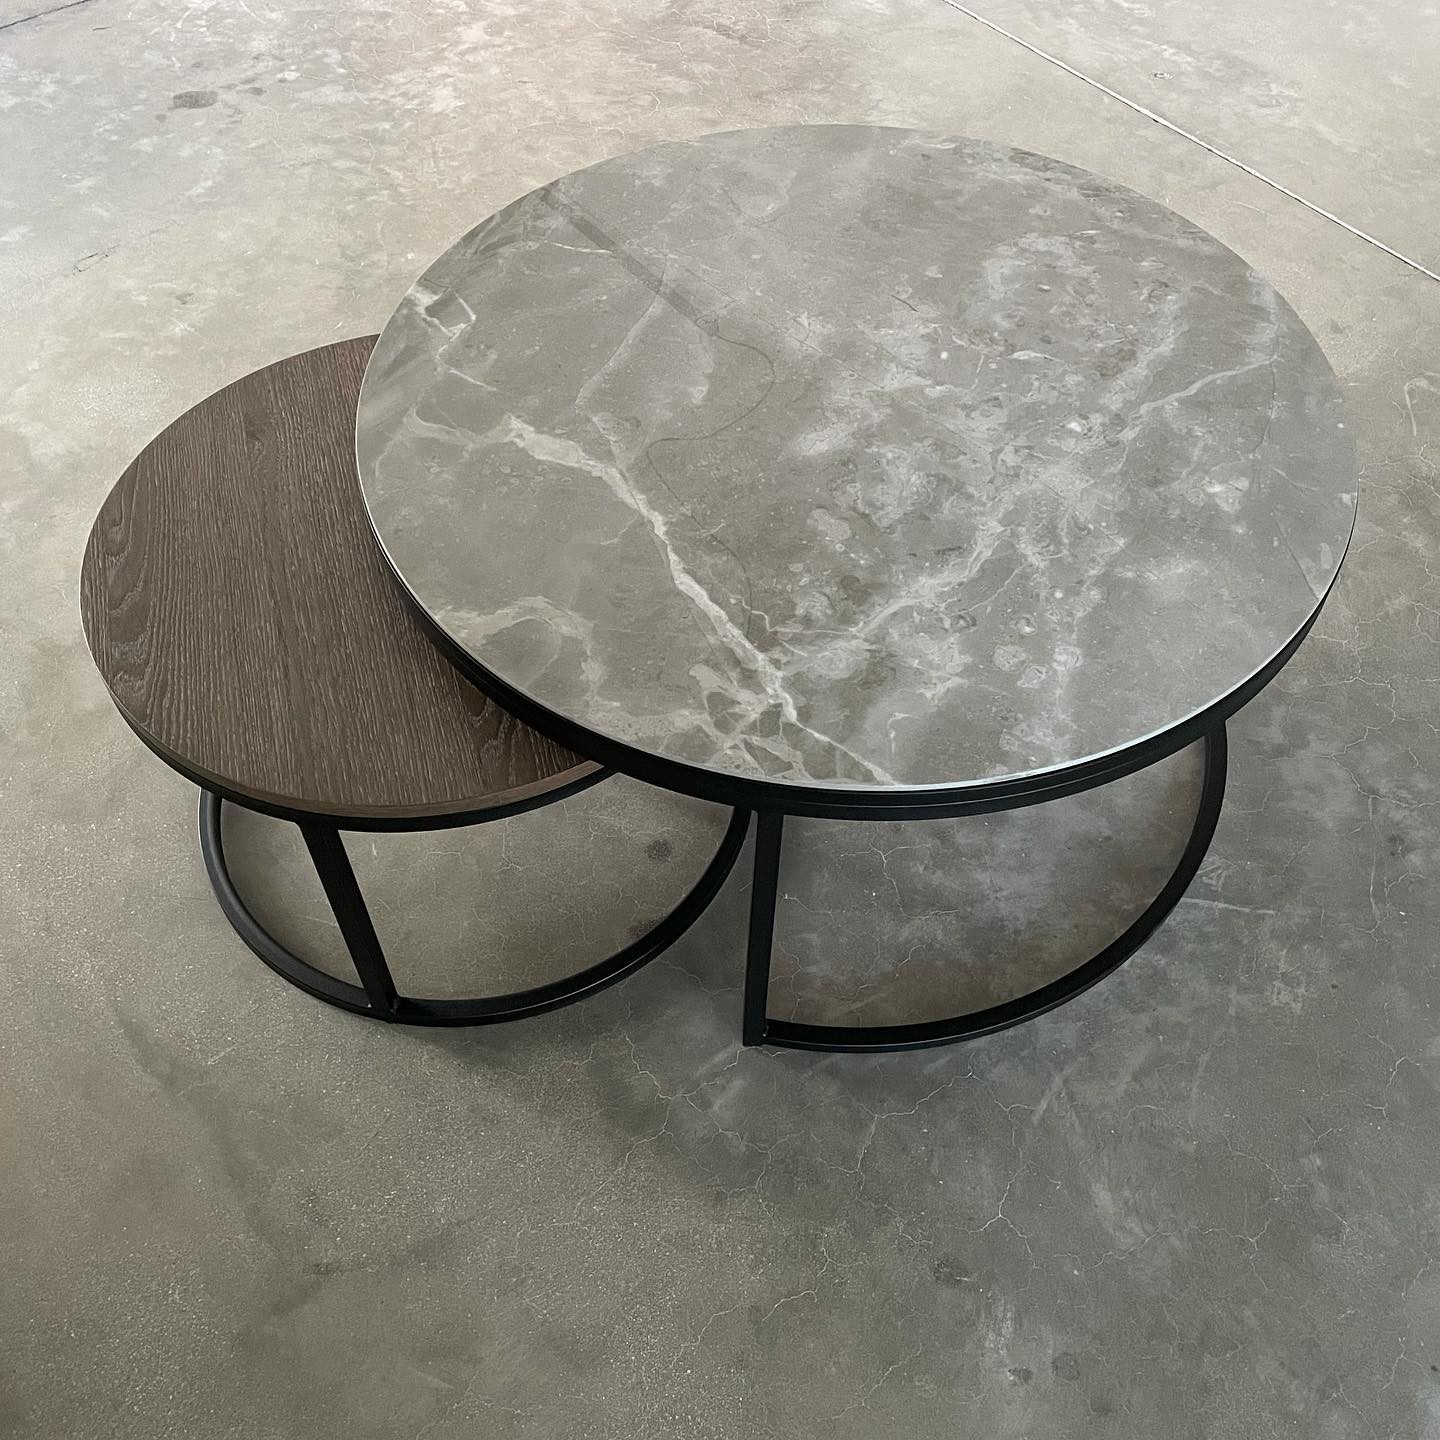 THE AXEL COFFEE TABLE